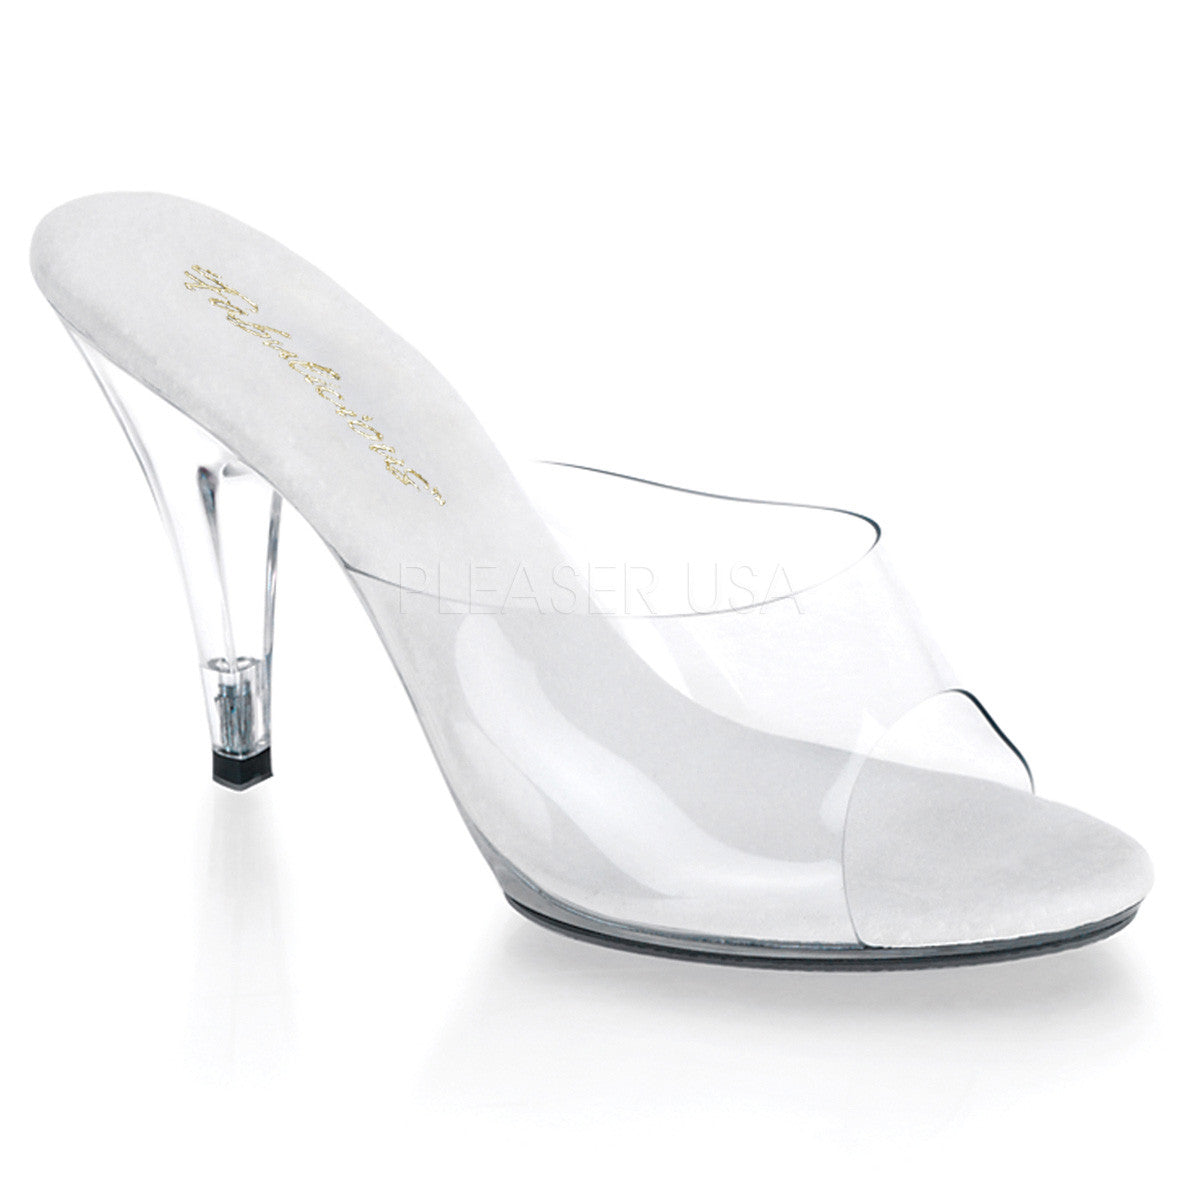 Fabulicious,FABULICIOUS CARESS-401 Clear-Clear Stiletto Slides - Shoecup.com